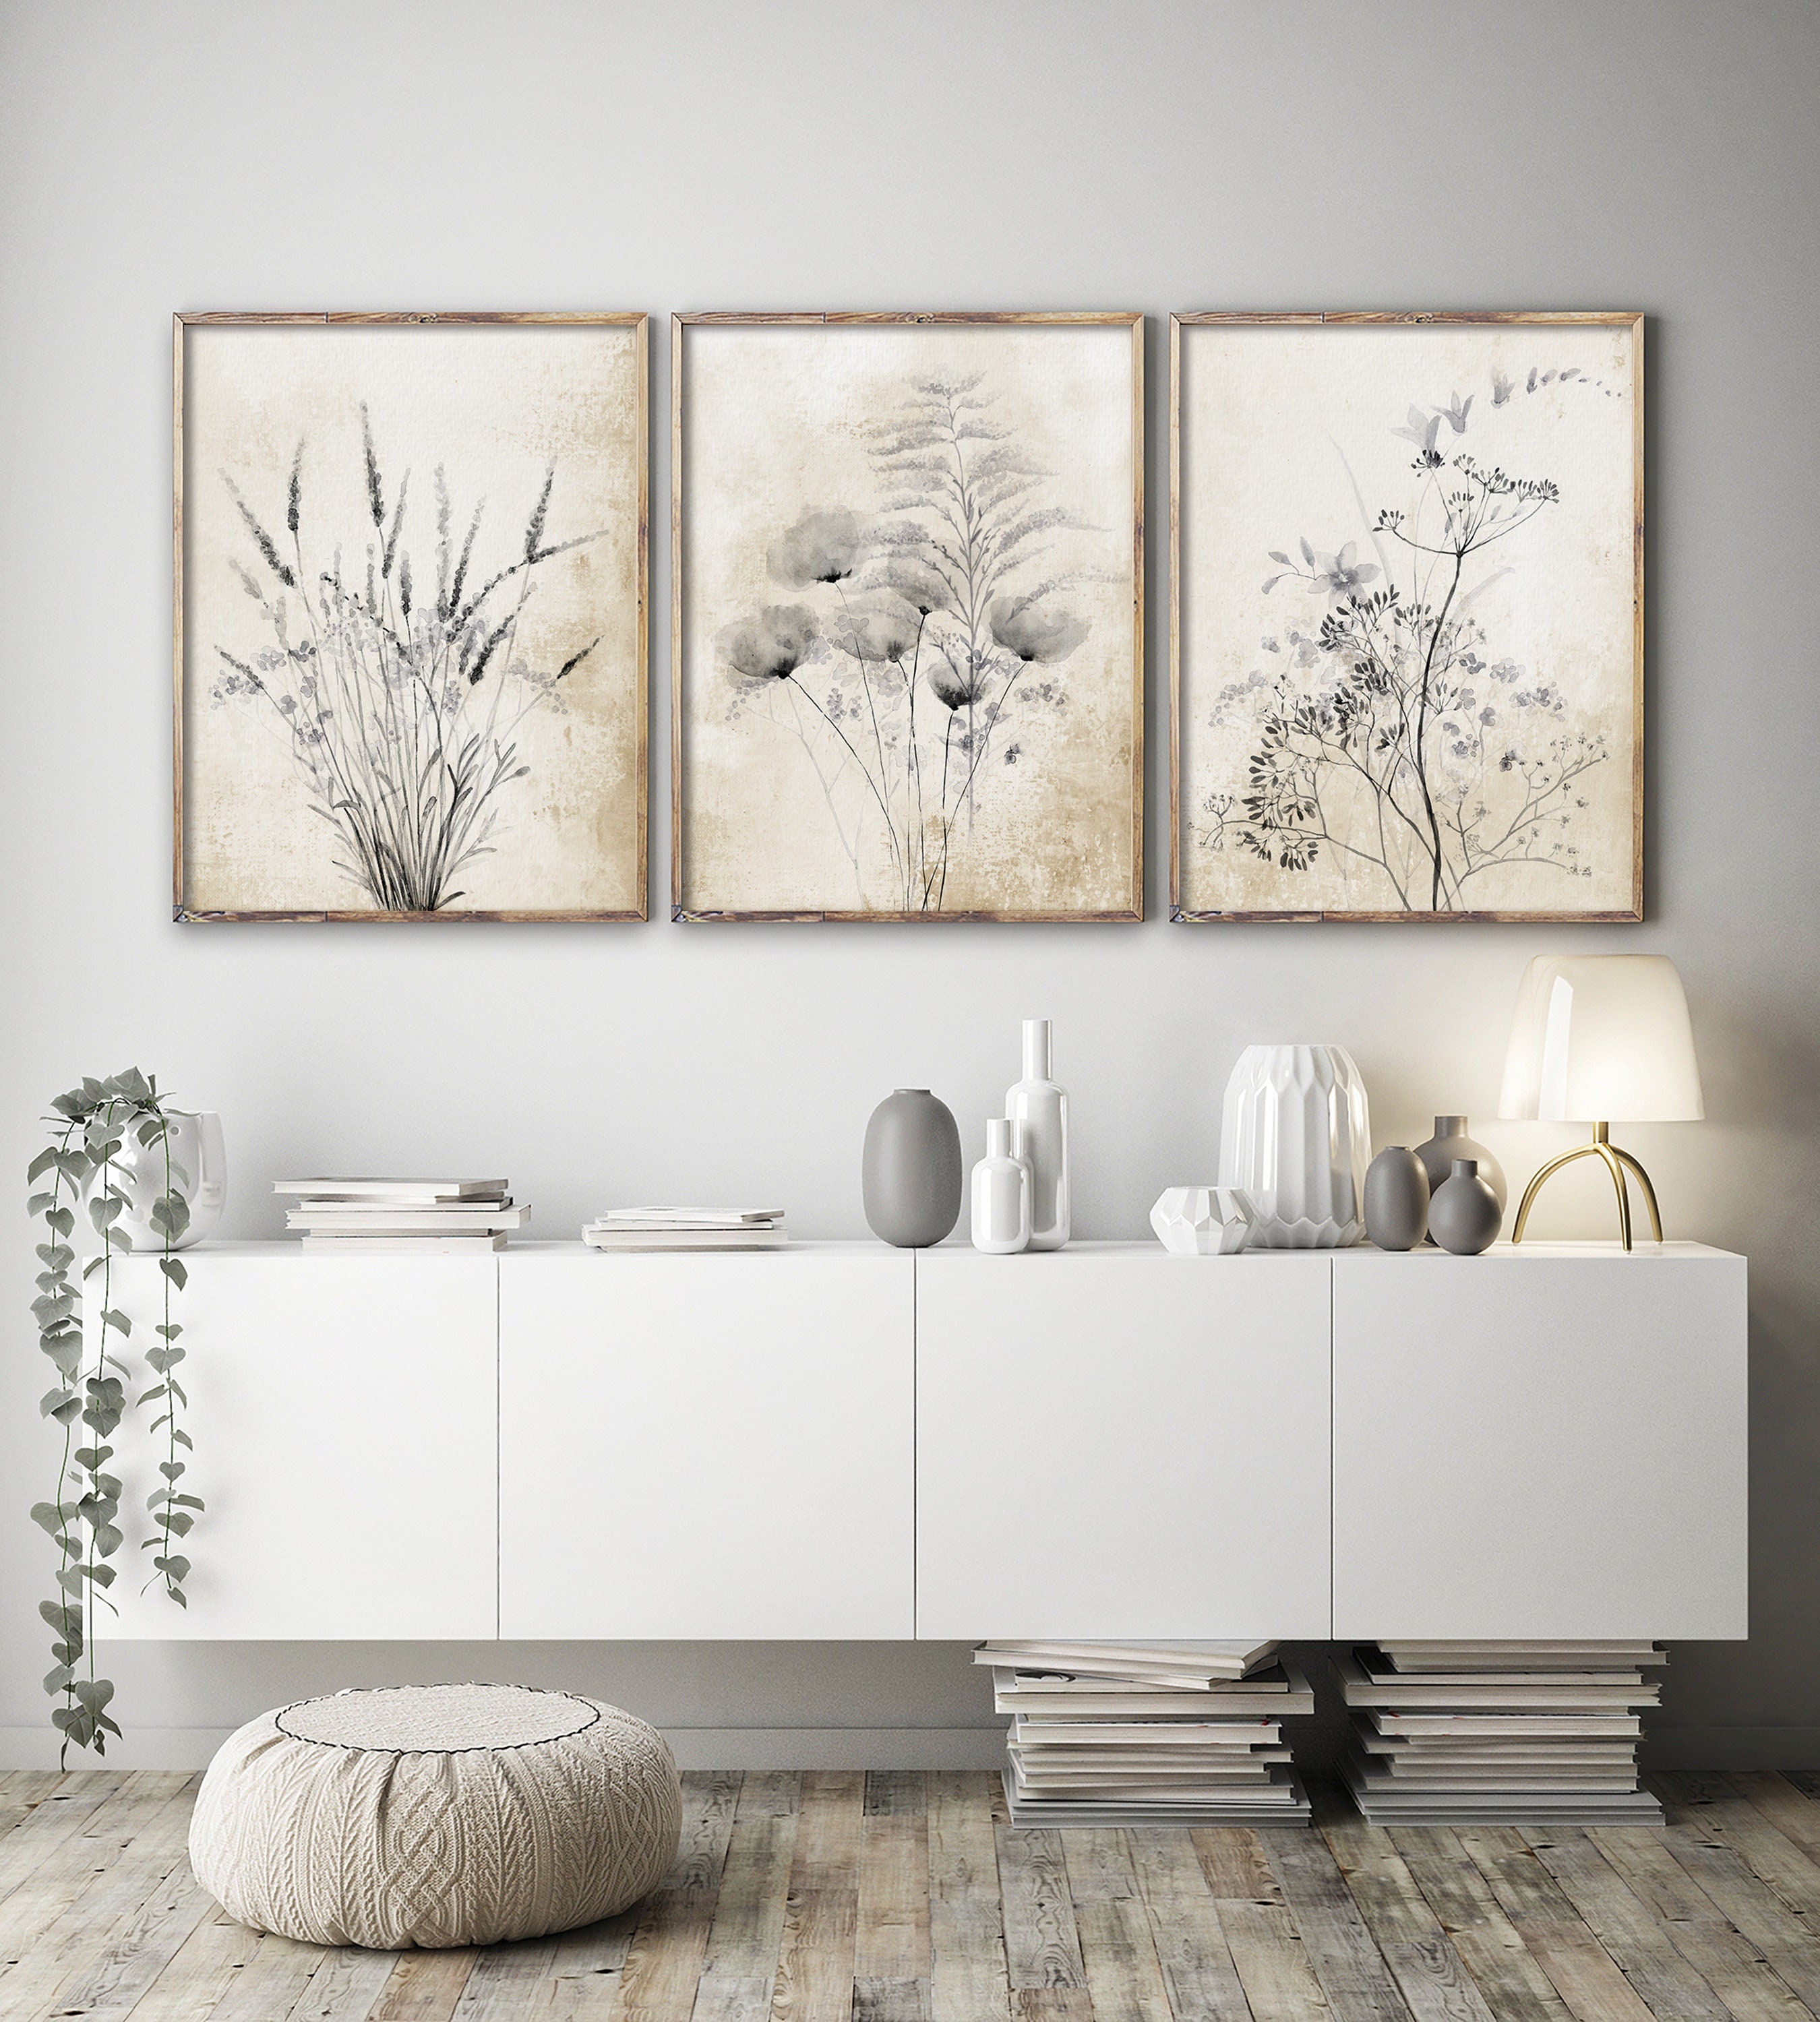 Black Wild Flowers on Rustic Background, Set of 3 Prints, Watercolor  Drawing, Lavender Painting, Minimalist Home Decor With Vintage Flair - Etsy